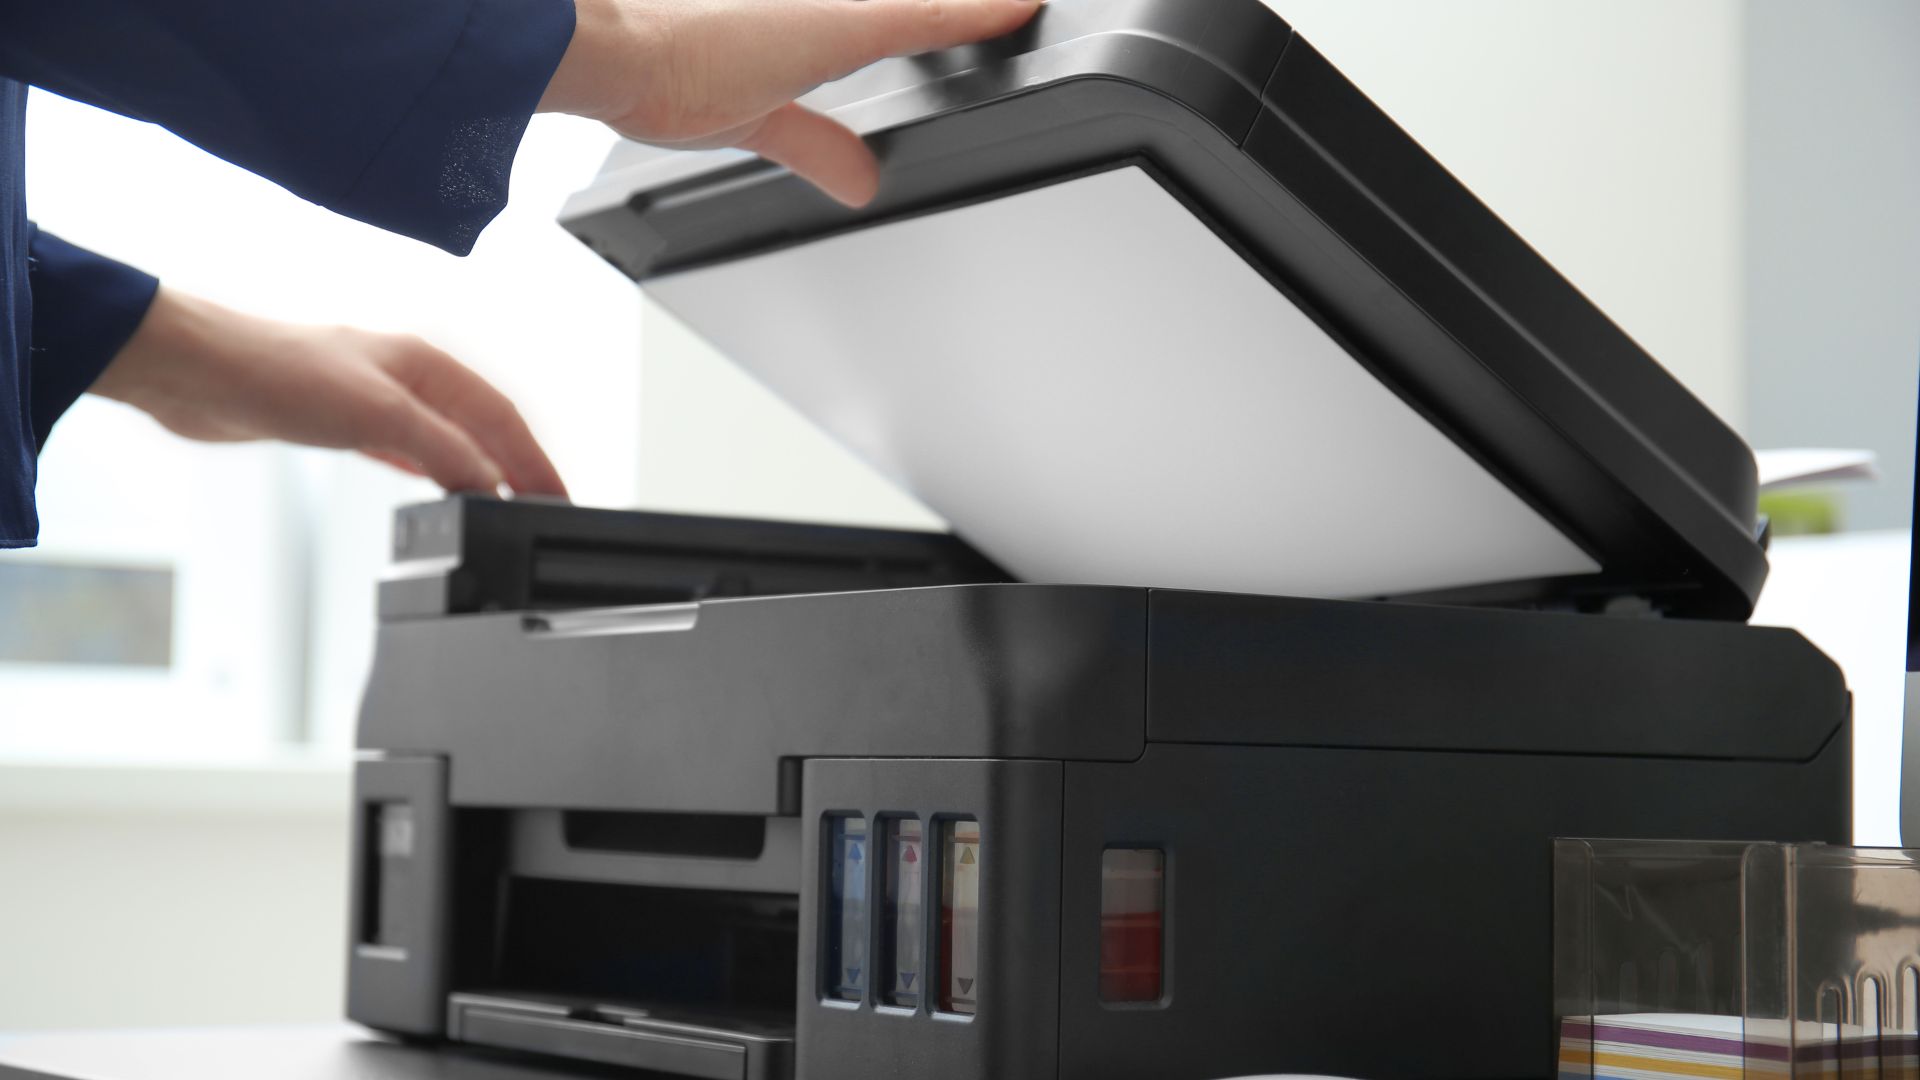 How to Scan Papers Using Multifunction Printers